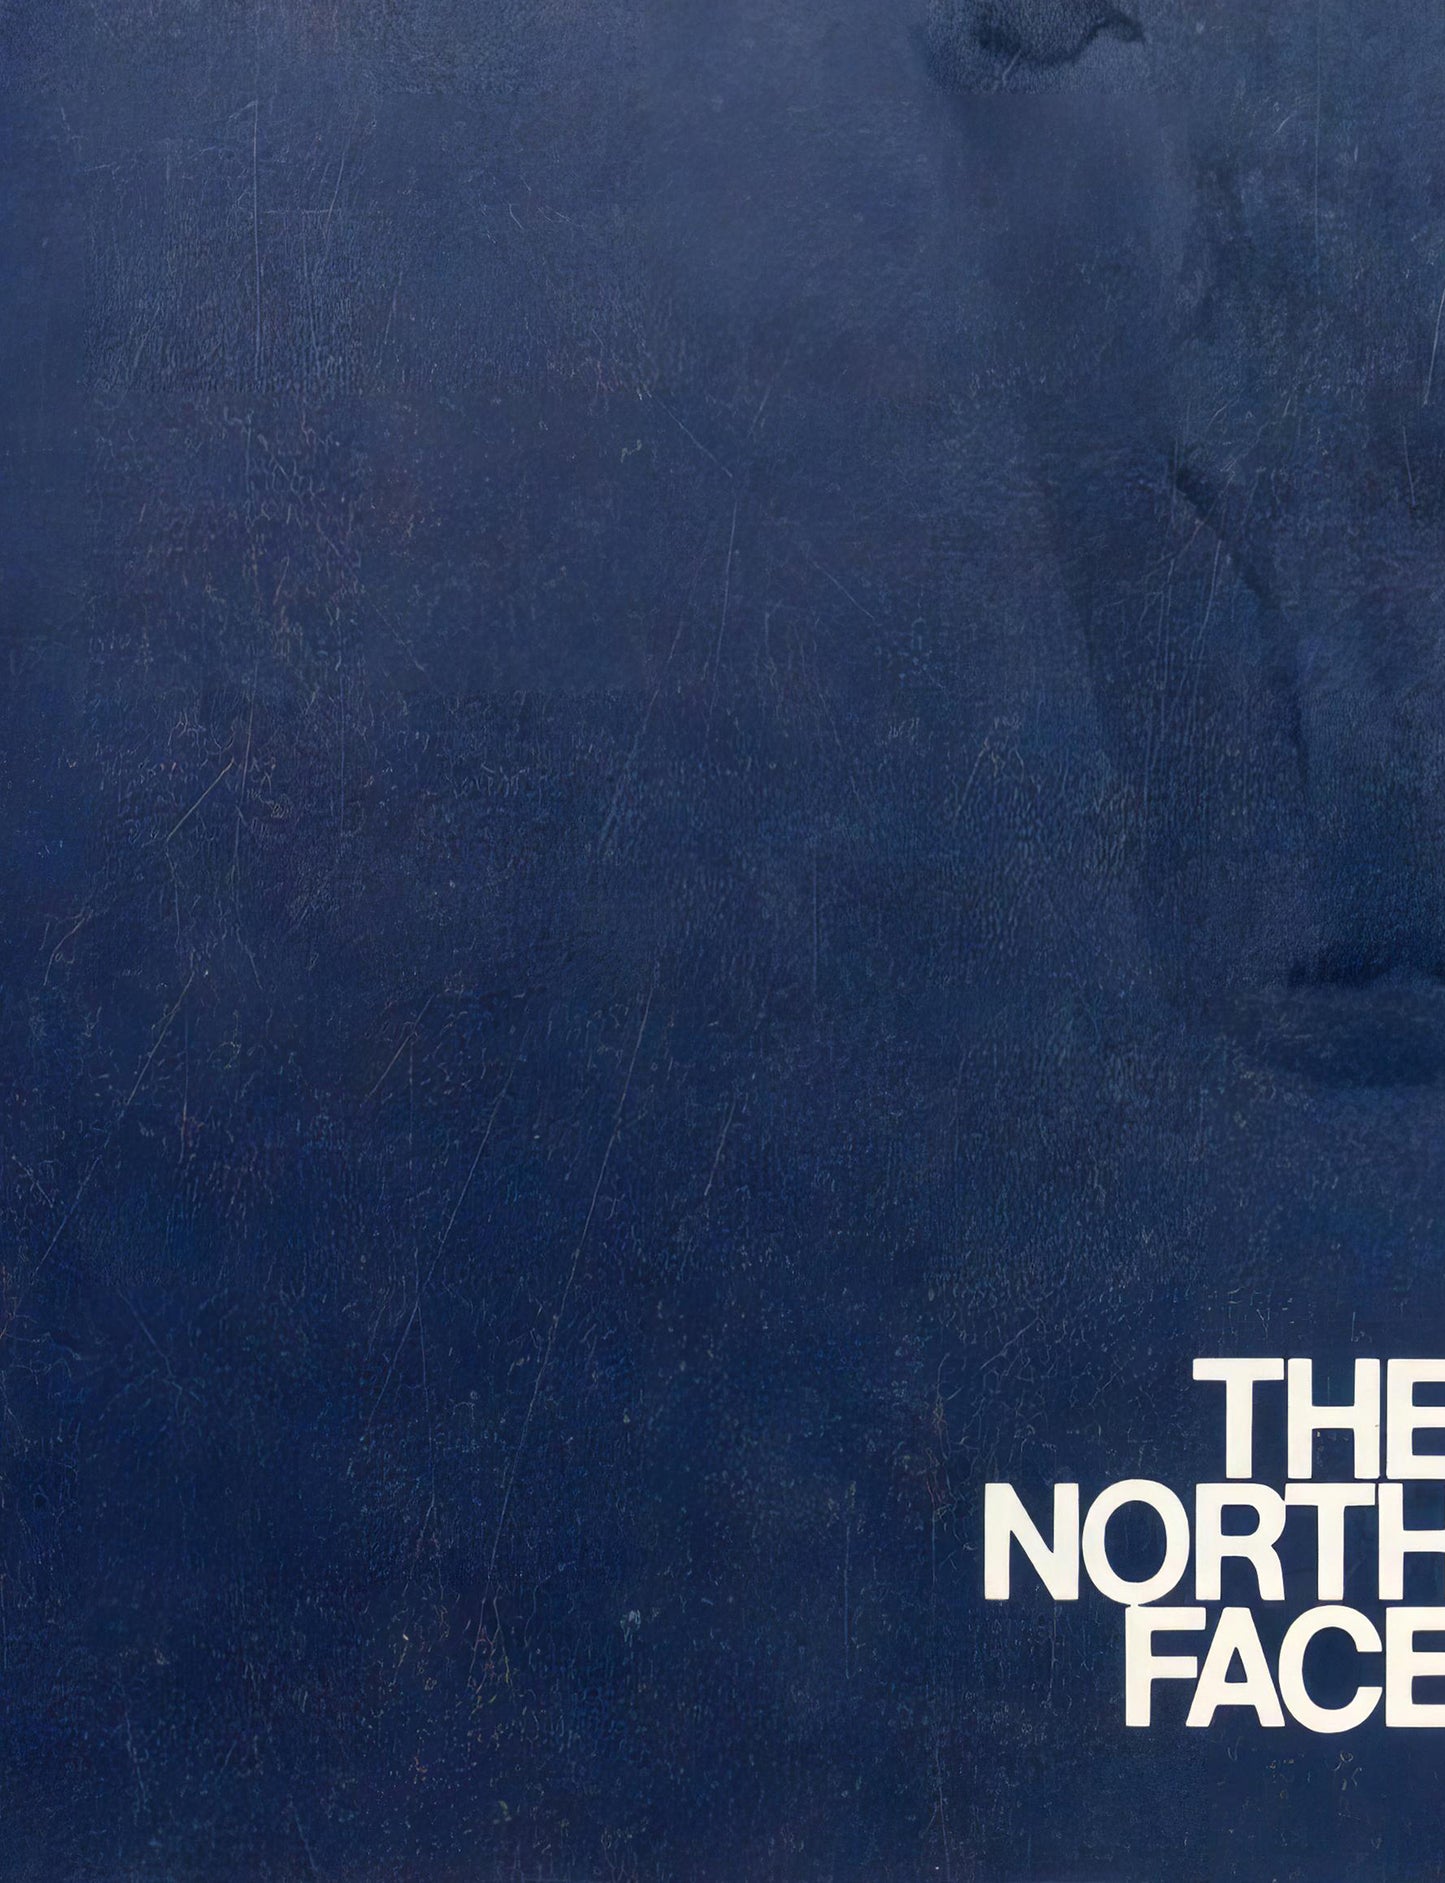 The North Face 1981-1982 Fall/Winter Magazine Front Cover Poster